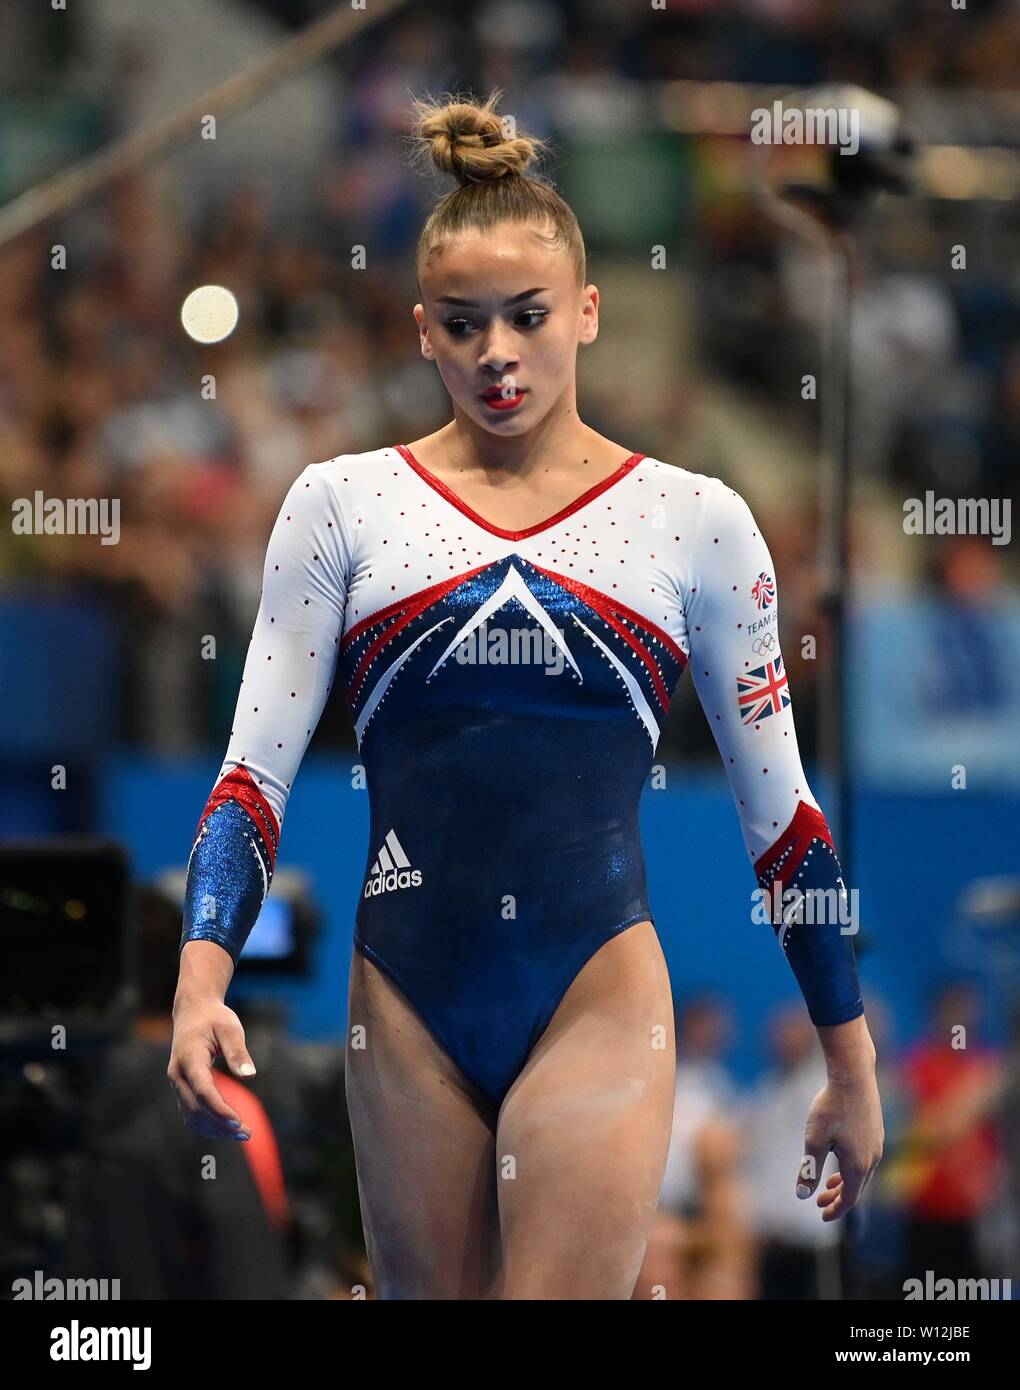 Minsk. Belarus. 29 June 2019. Georgia-Mae Fenton (GBR) during the womens all round final of the Artistic Gymnastics at the 2nd European games. Credit Garry Bowden/SIP photo agency/Alamy live news. Stock Photo